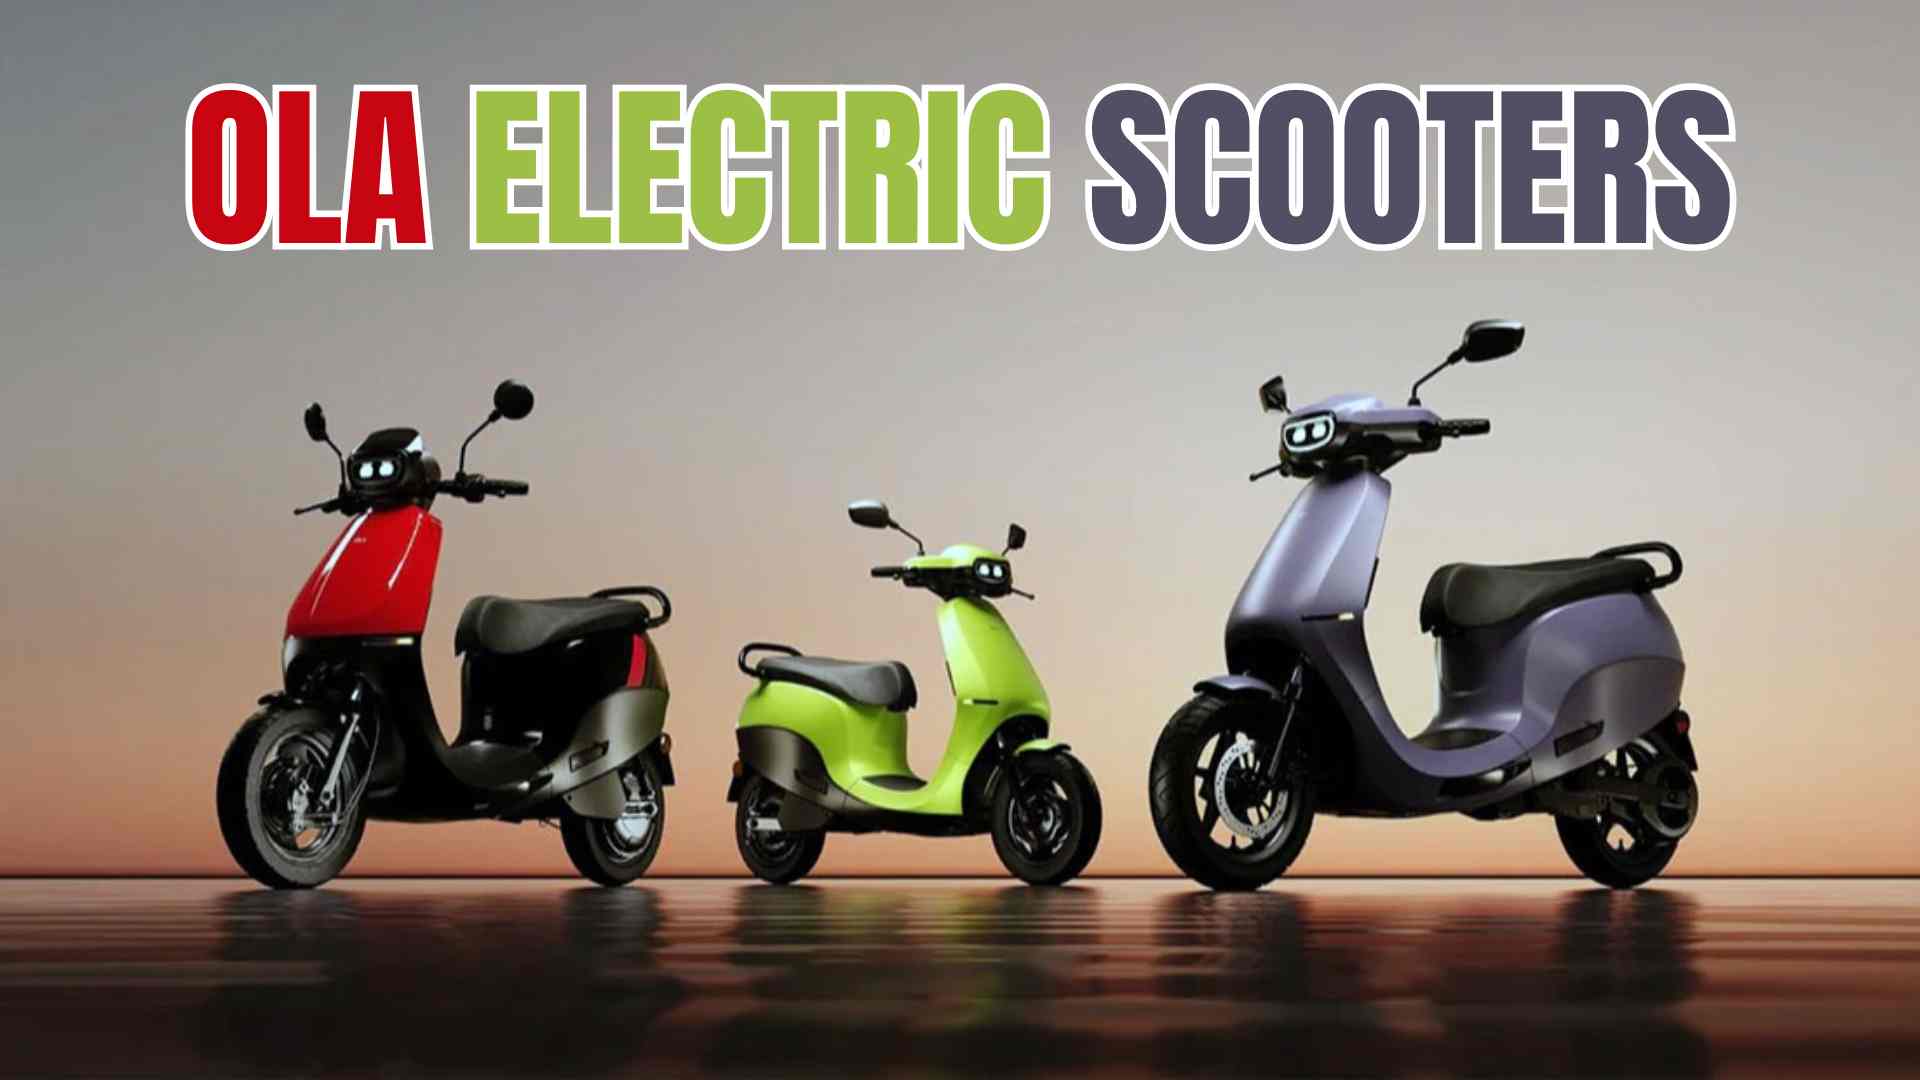 OLA ELECTRIC SCOOTERS